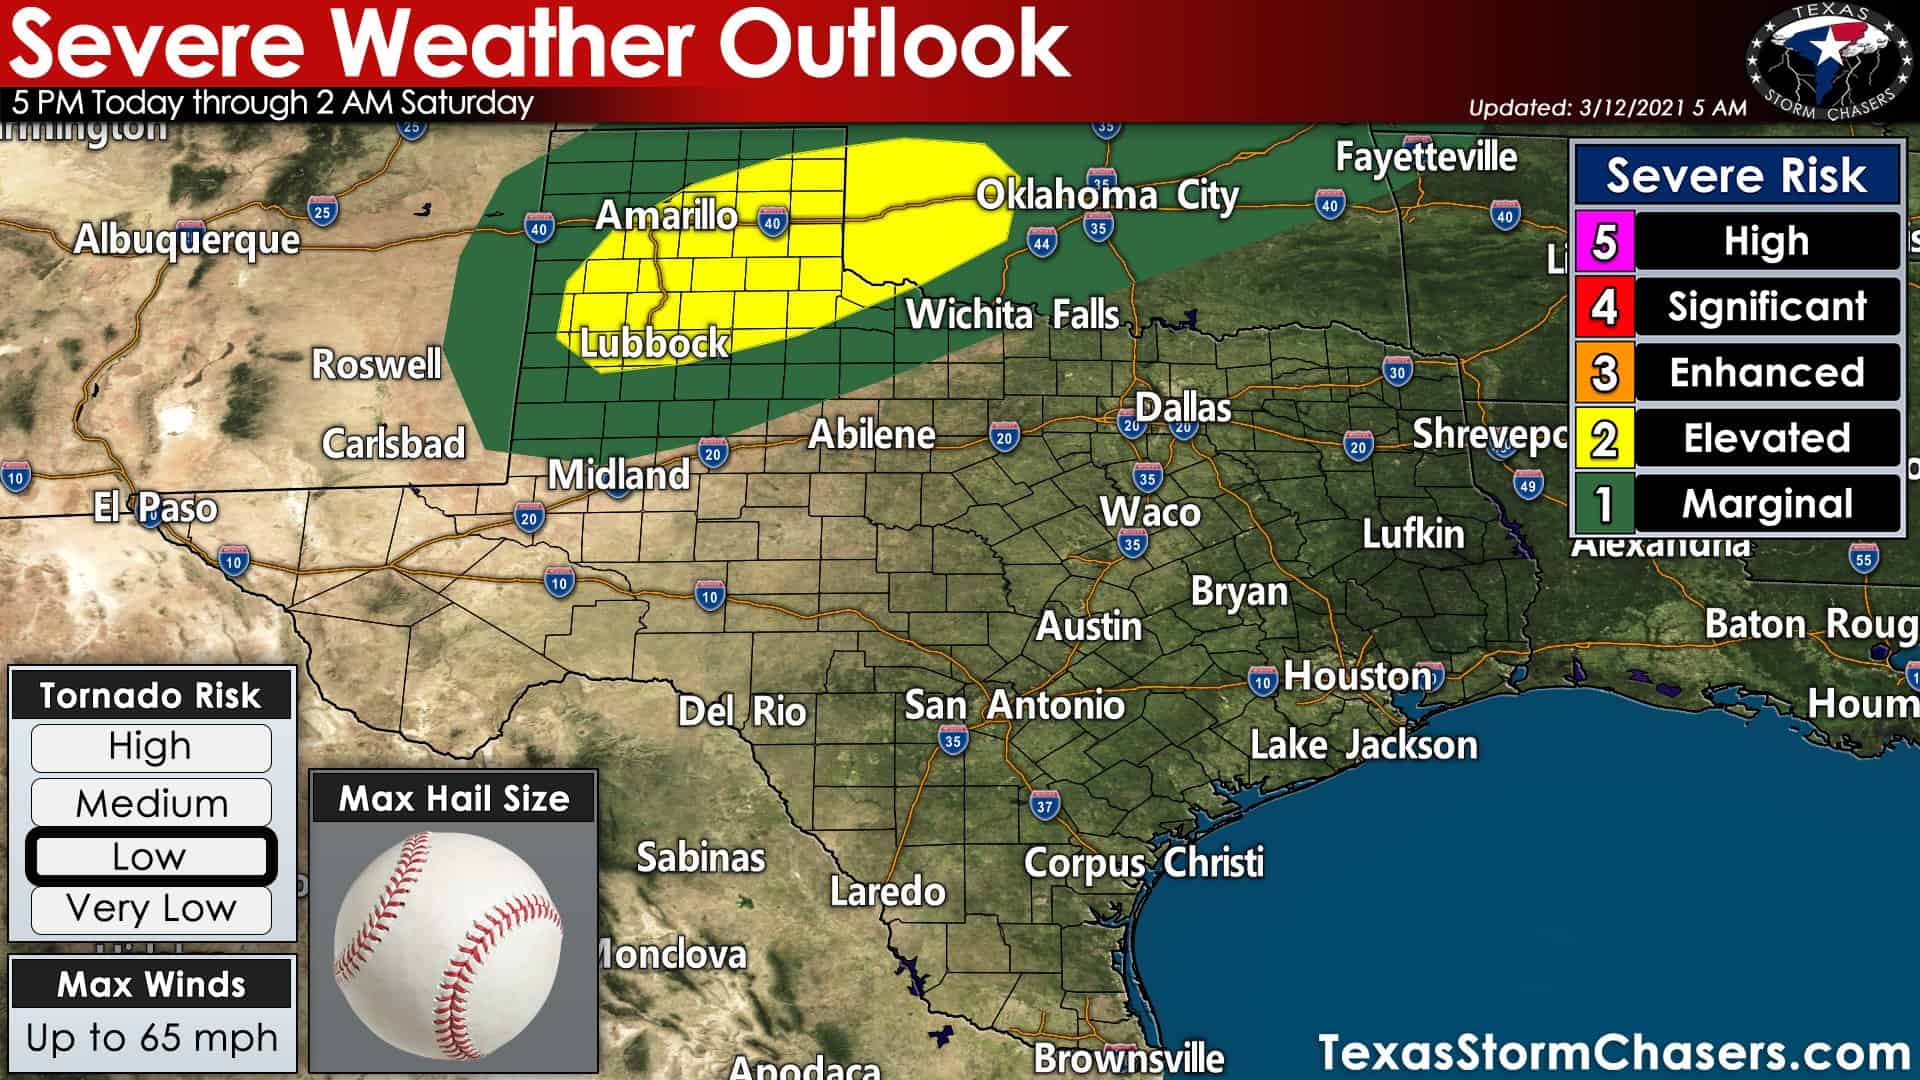 Severe weather threat later Today & Saturday across western 1/2 of Texas